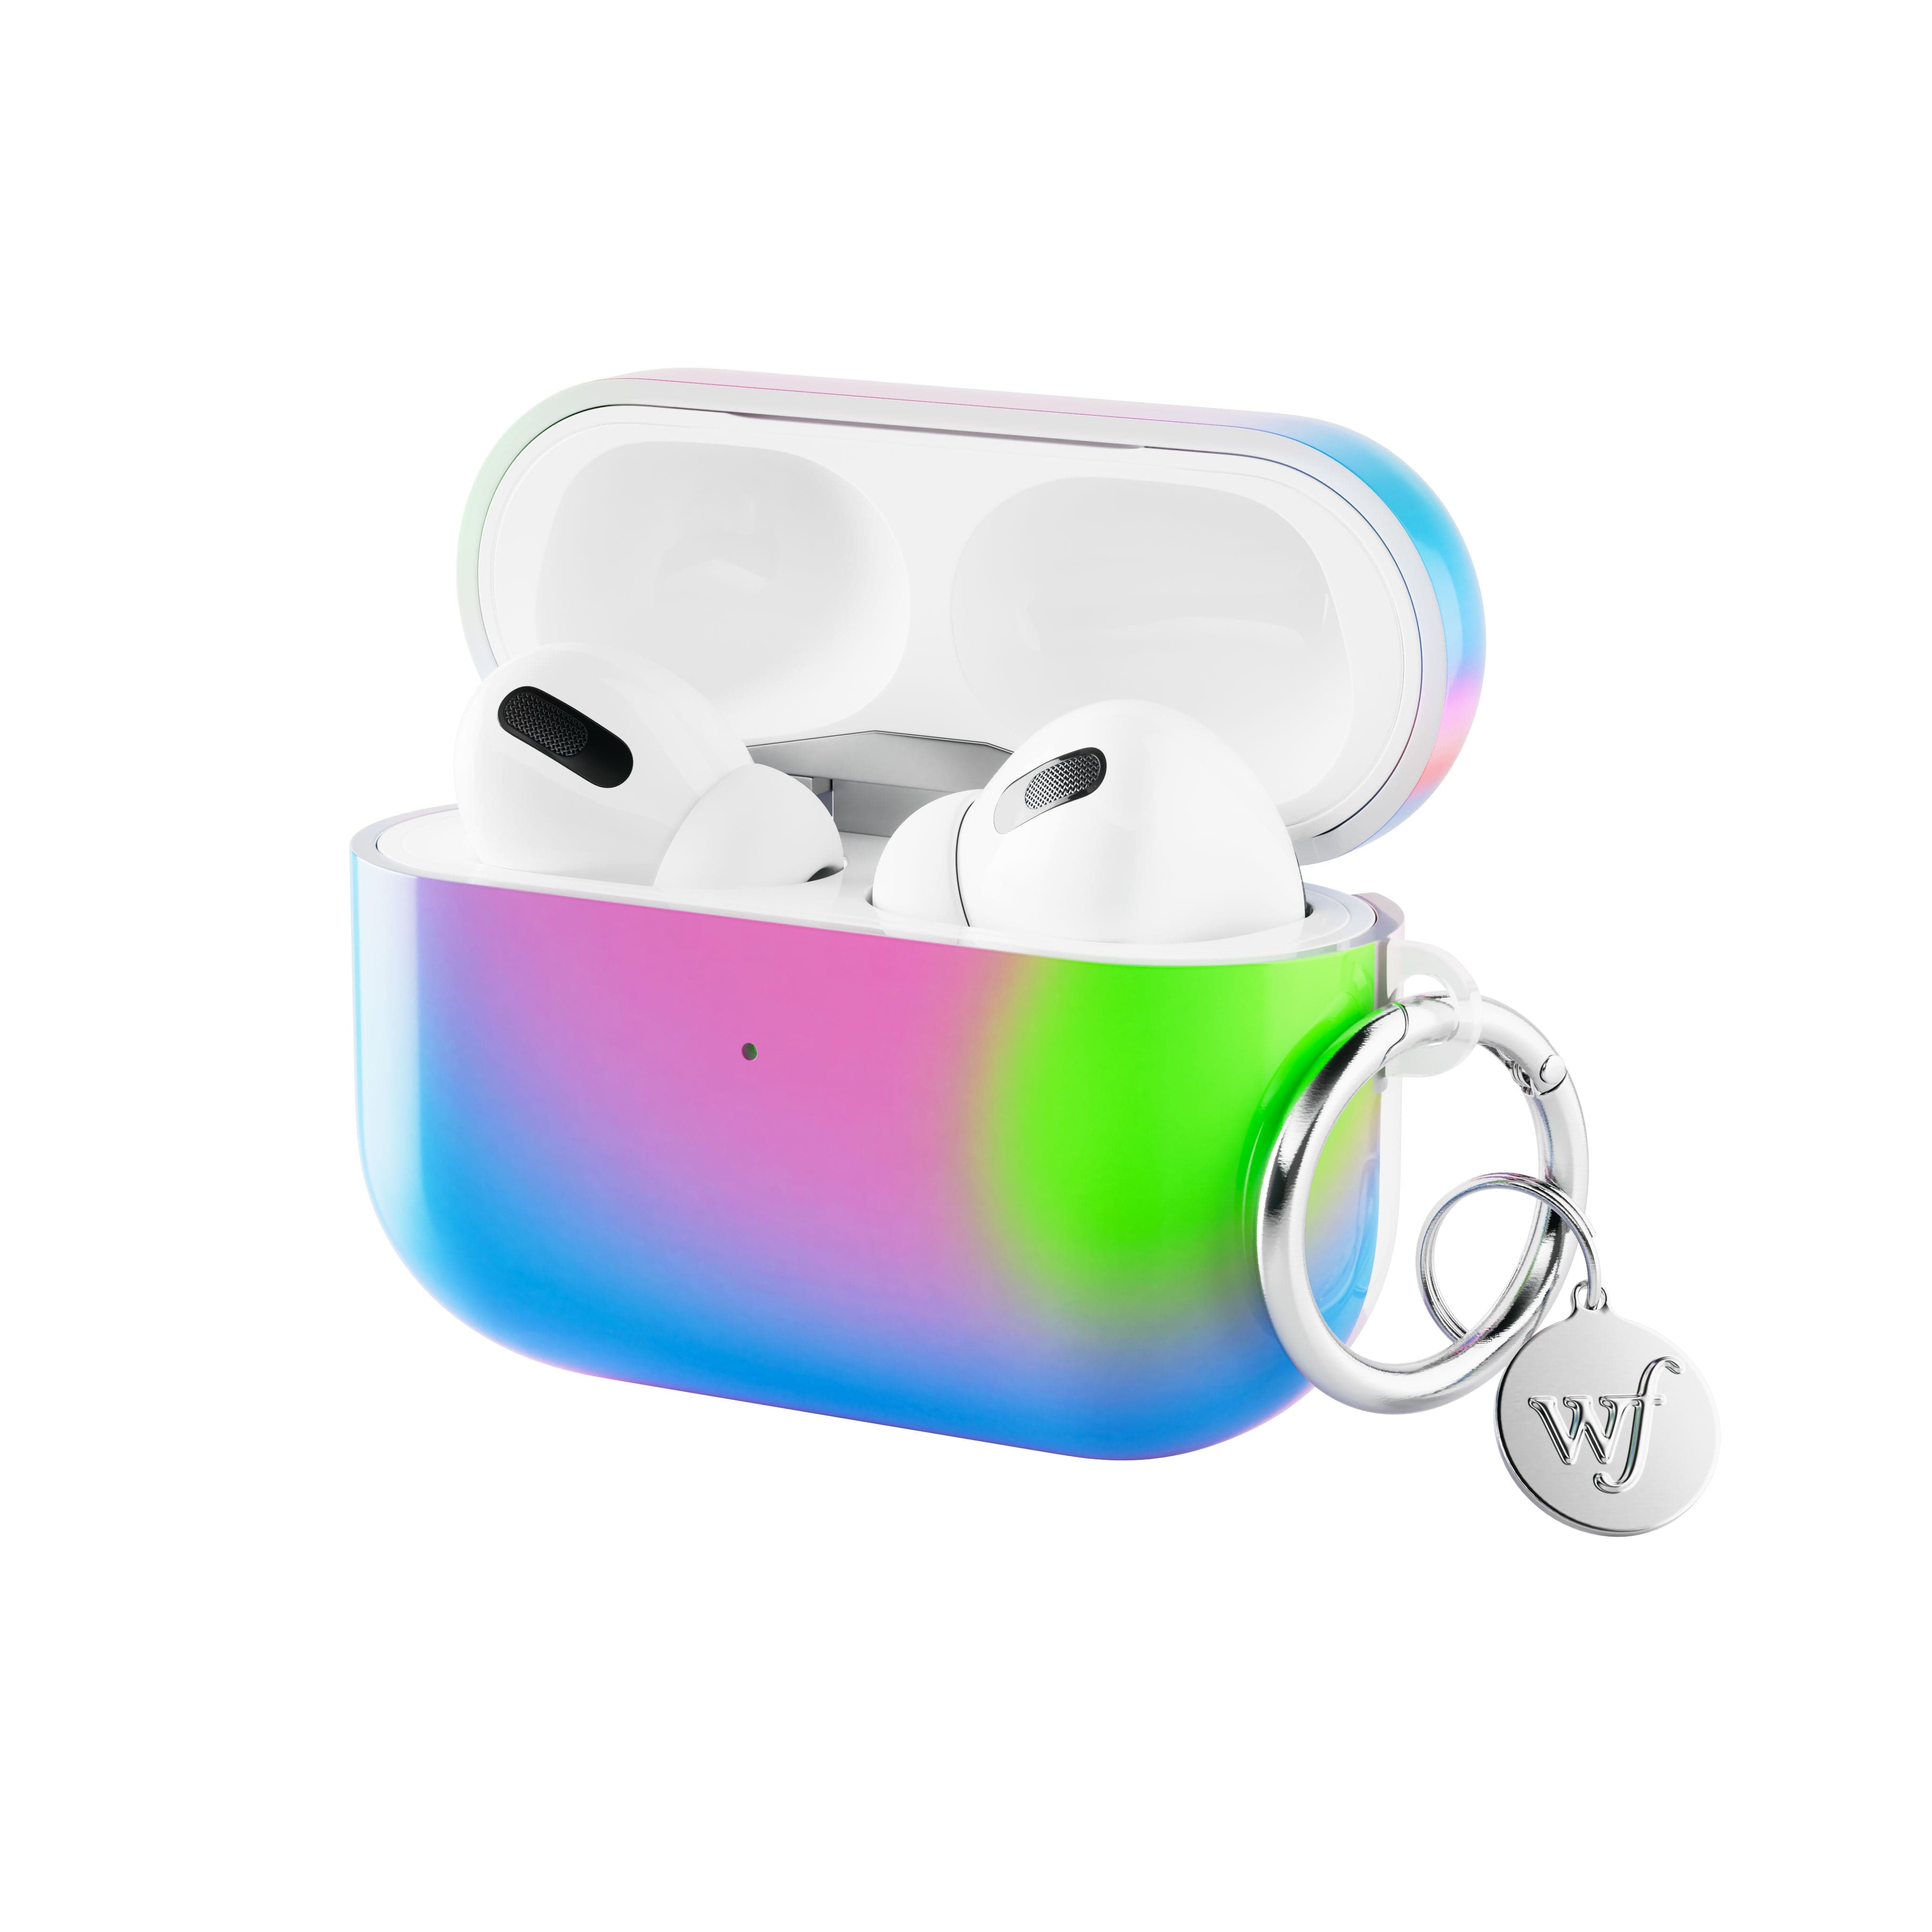 AirPods Pro Case Covers